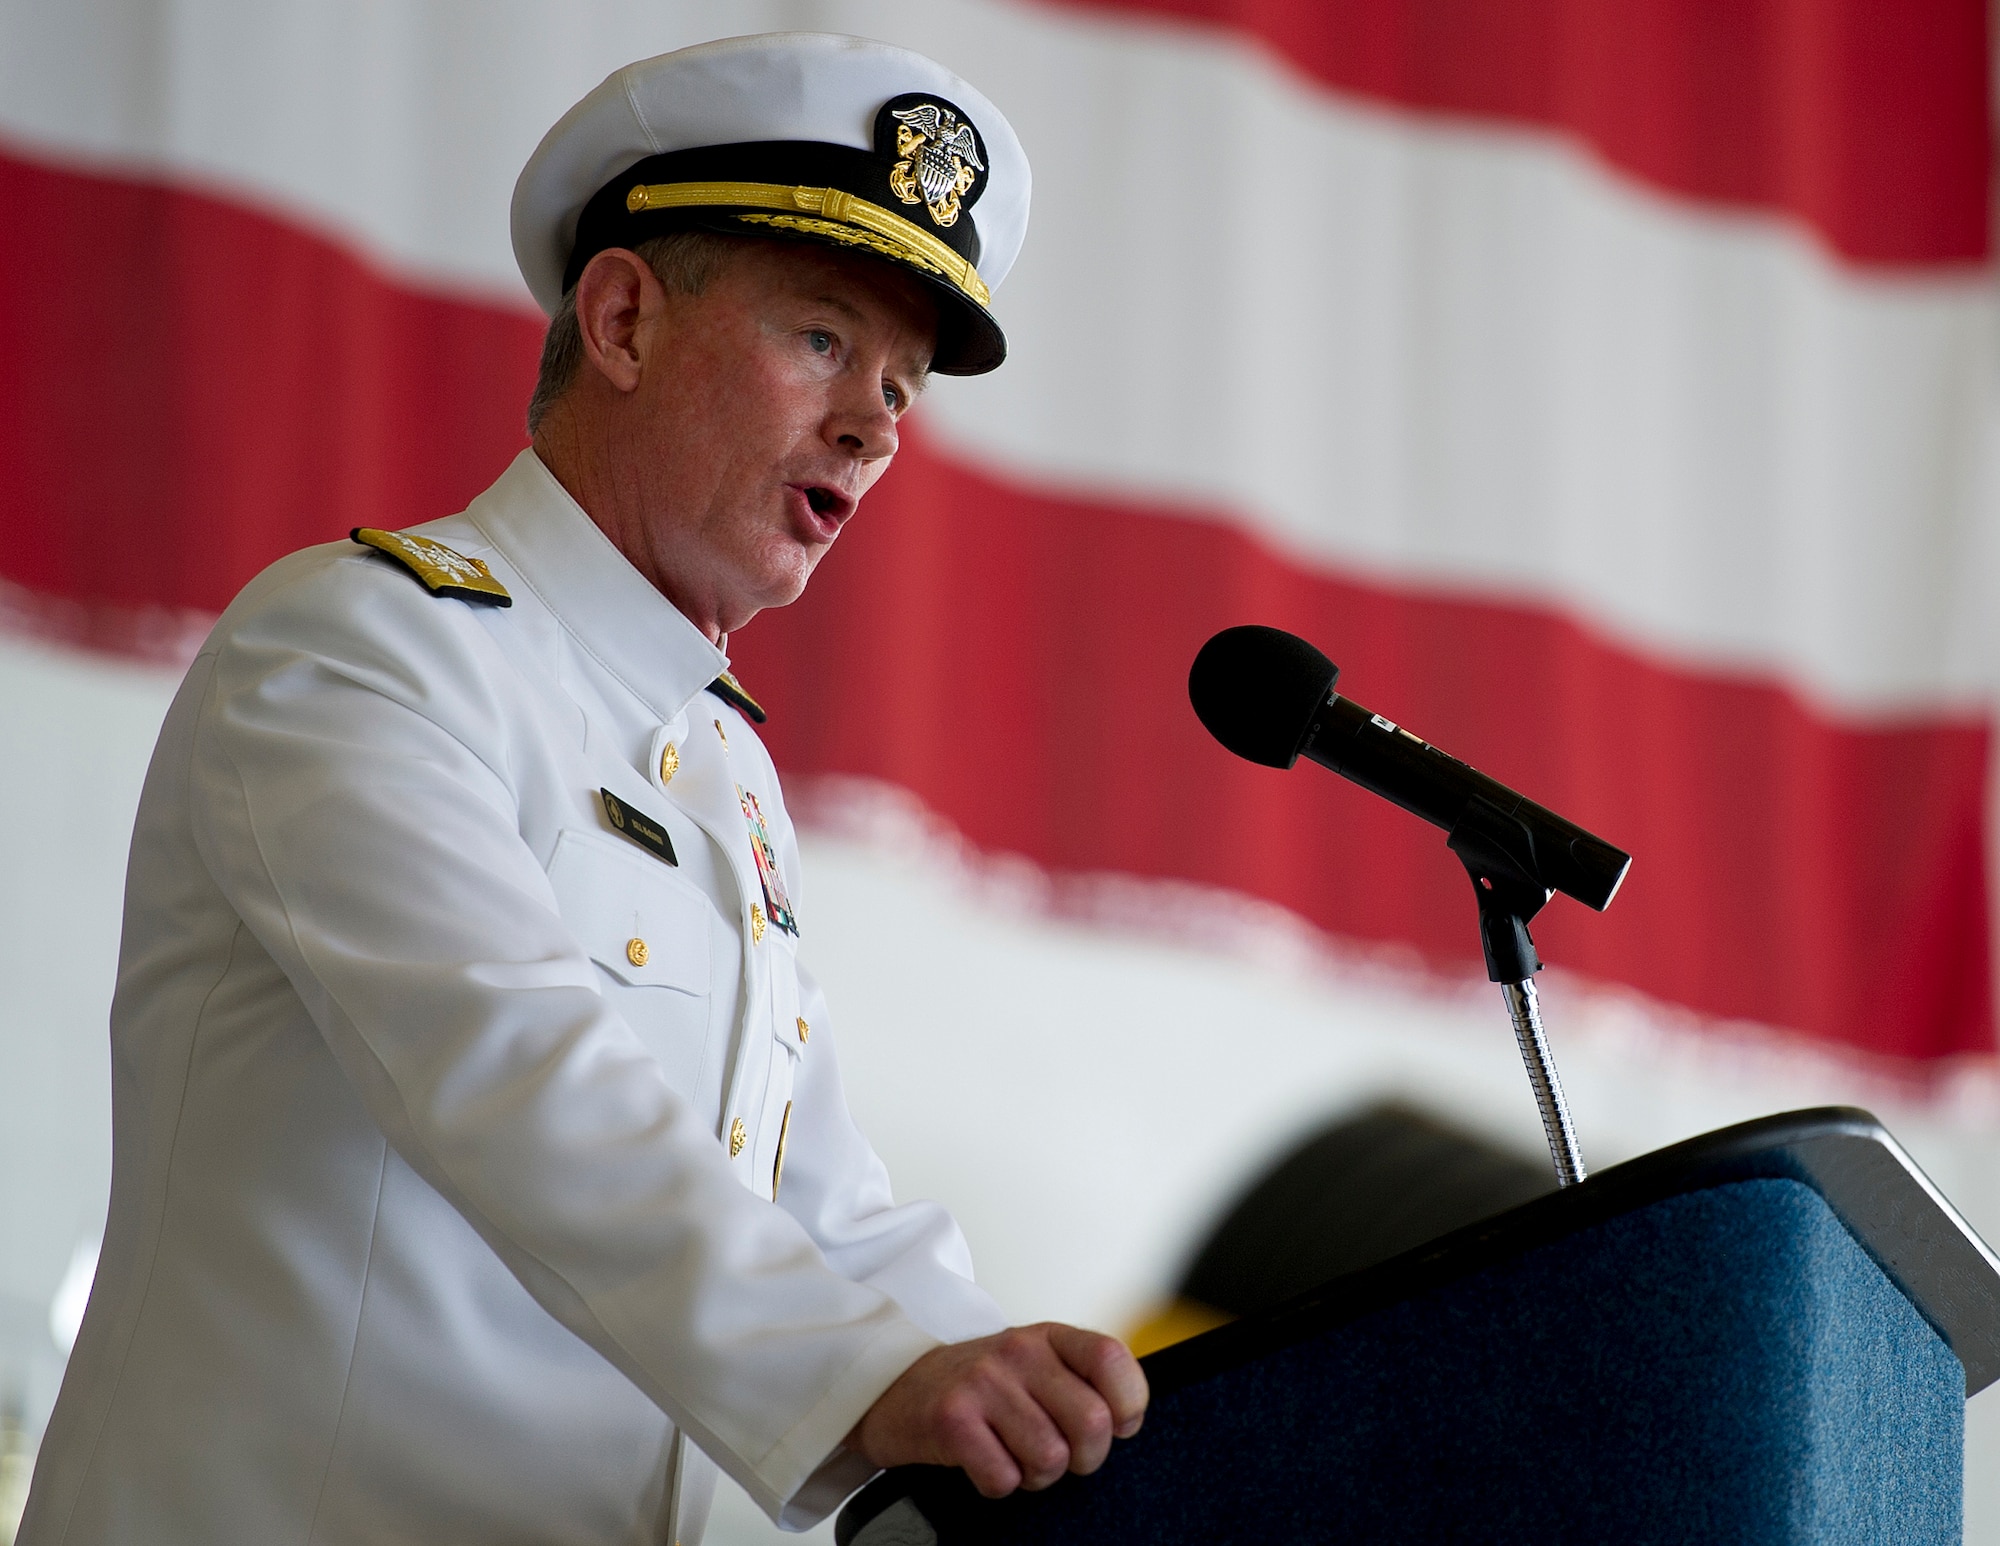 Adm. William McRaven, commander of U.S. Special Operations Command, speaks during the Air Force Special Operations Command change of command ceremony on Hurlburt Field, Fla., July 3, 2014. Lt. Gen. Eric Fiel relinquished command to Lt. Gen. Bradley Heithold, making him the 10th AFSOC commander. (U.S. Air Force photo by Senior Airman Christopher Callaway)